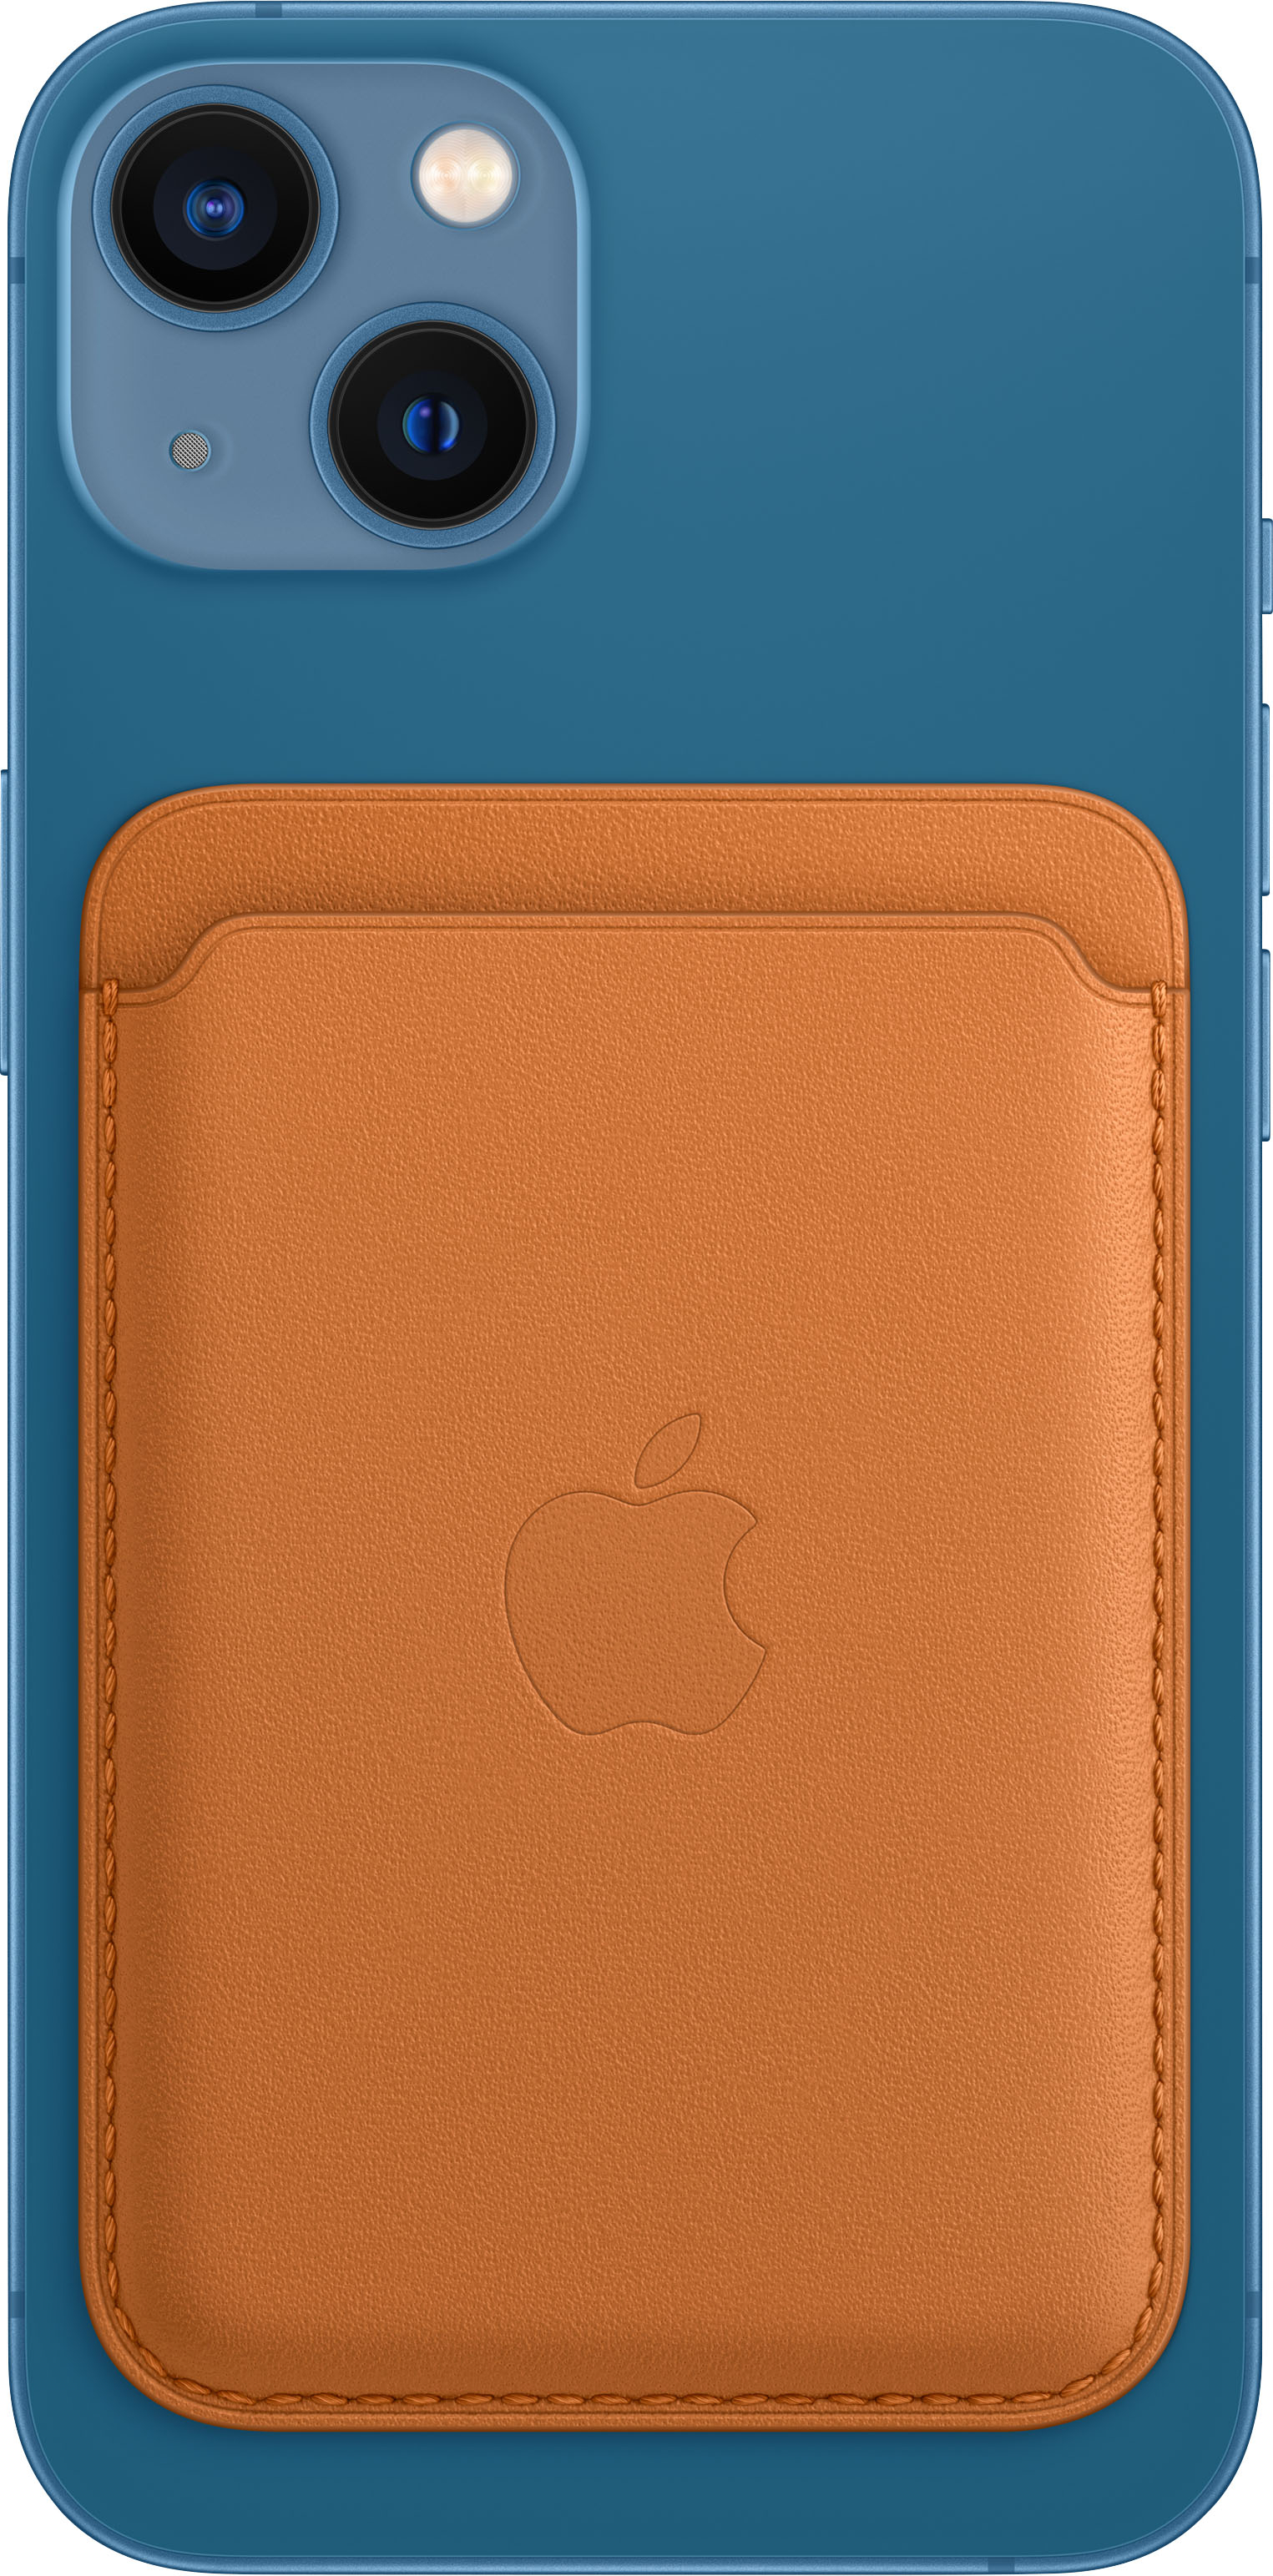 Customer Reviews: Apple iPhone Leather Wallet with MagSafe Golden Brown ...